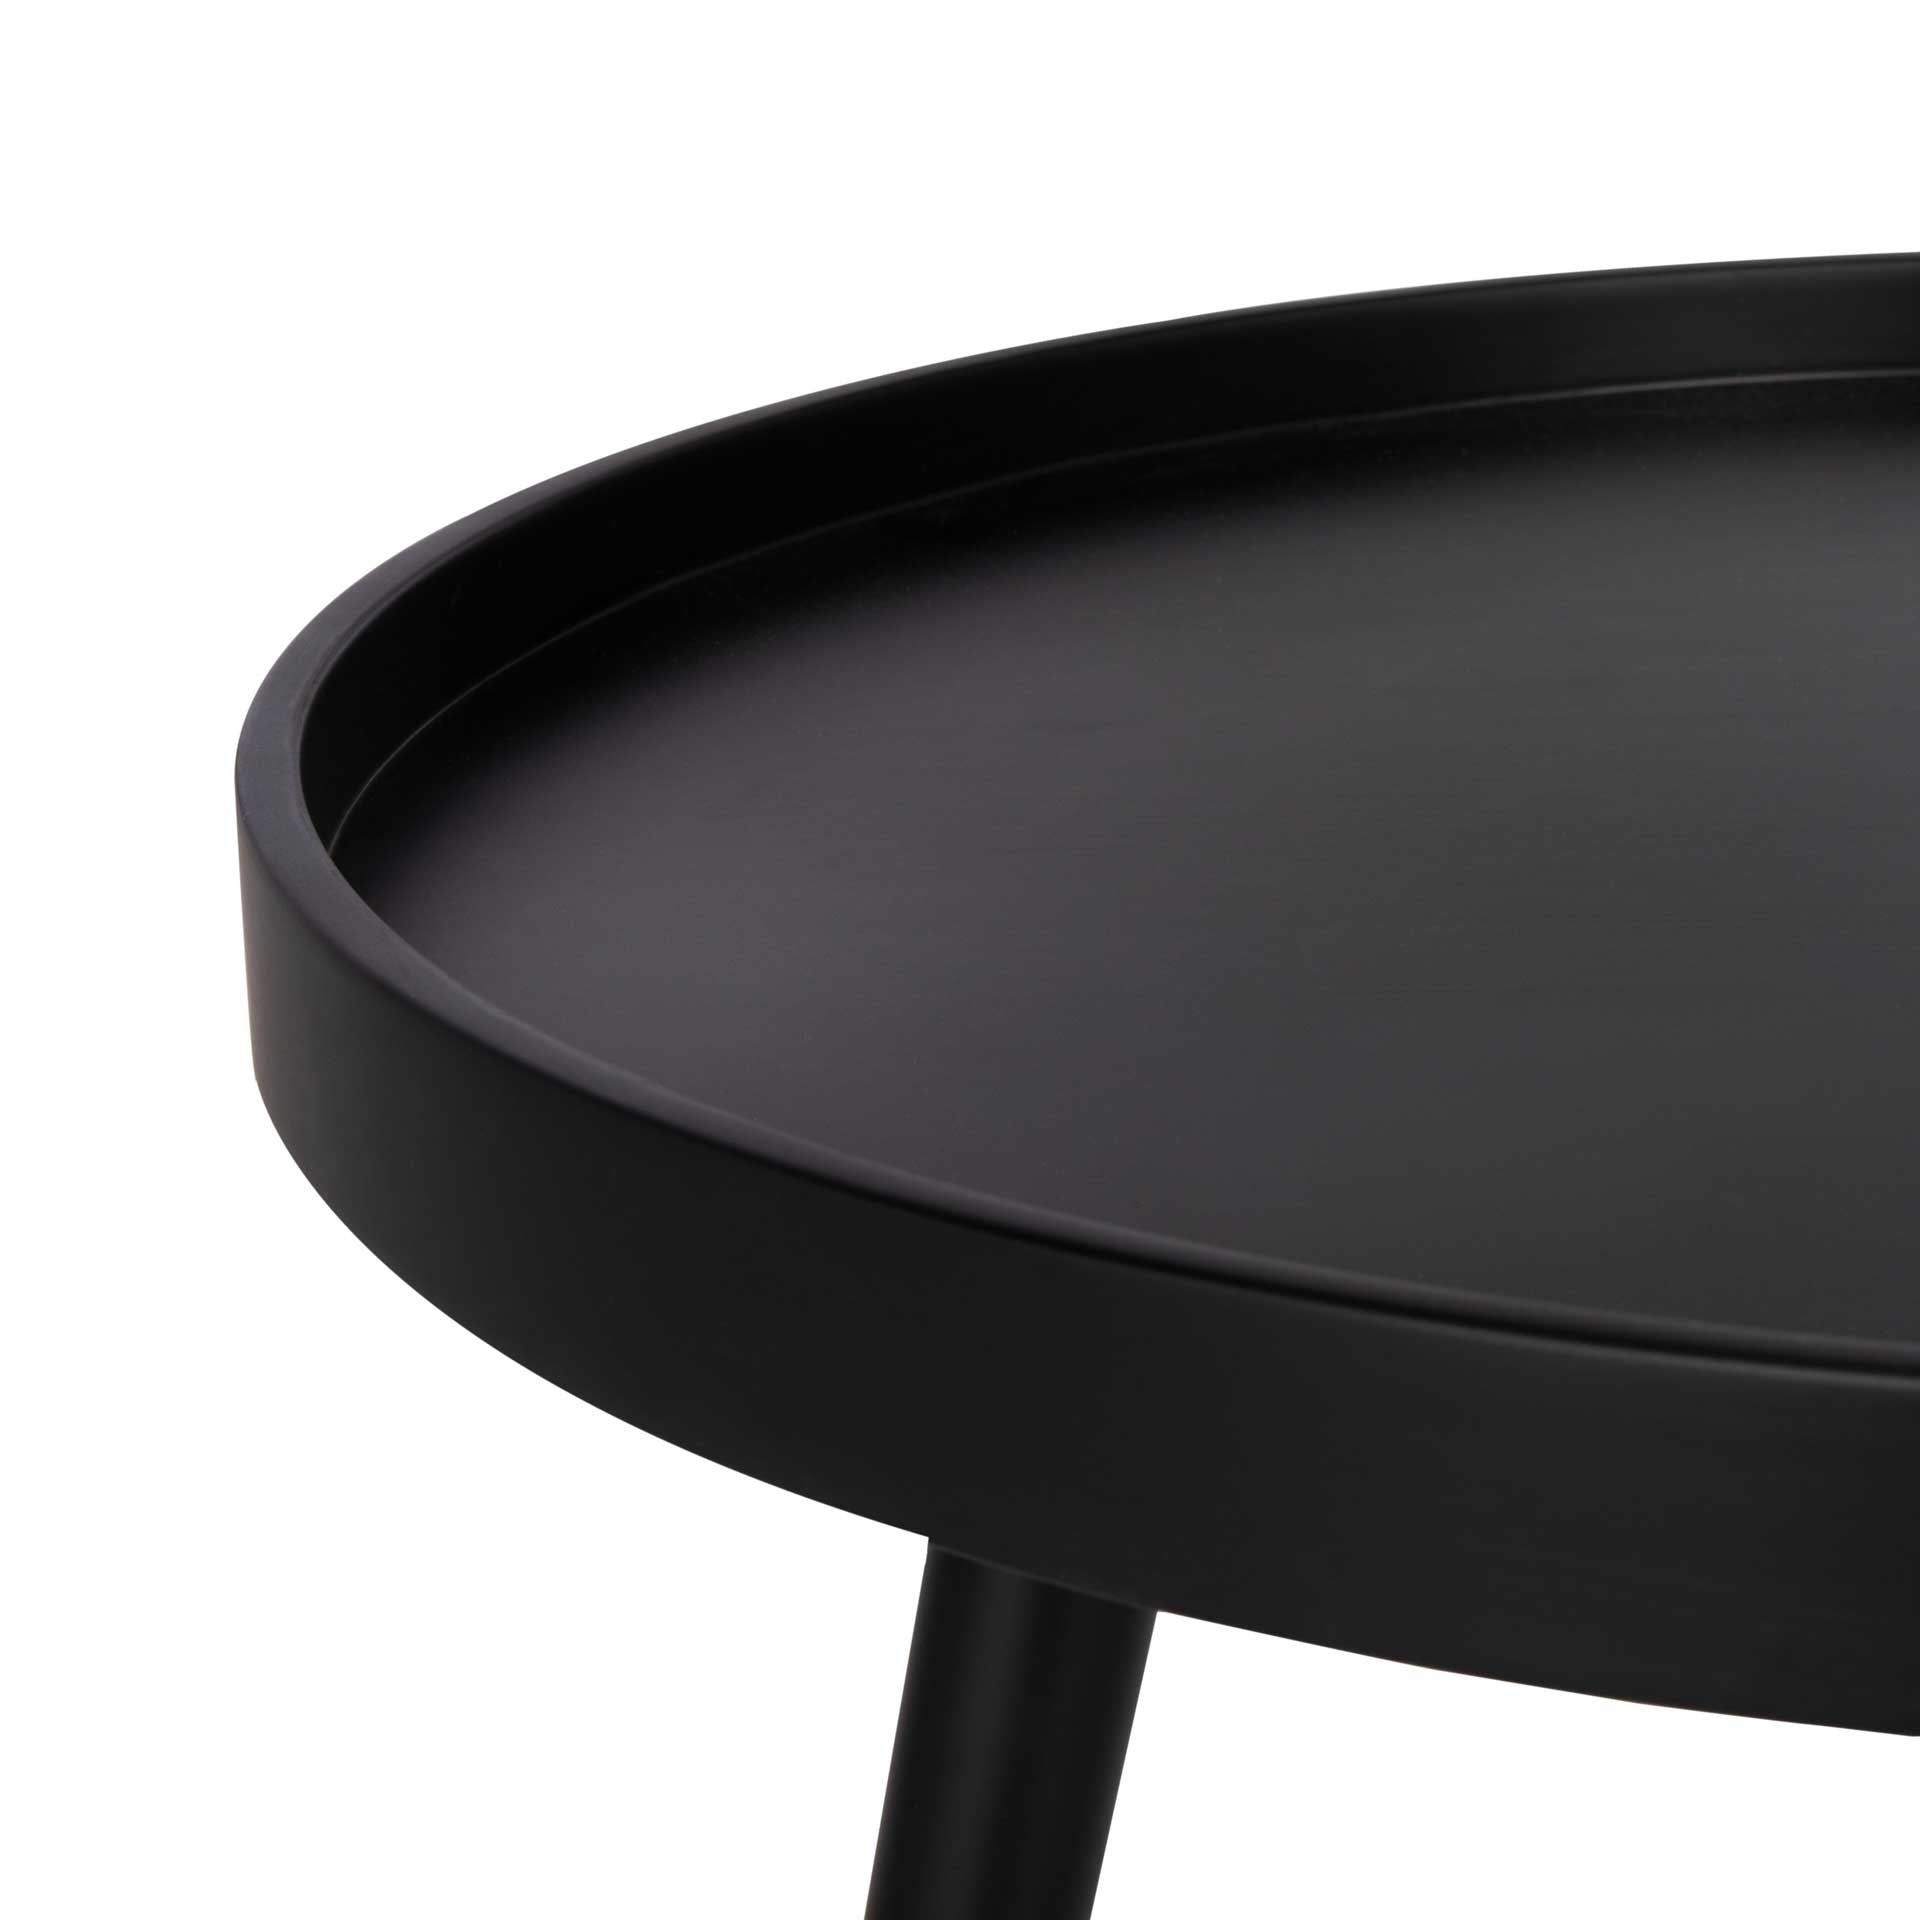 Freya Round Tray Top Side Table Black